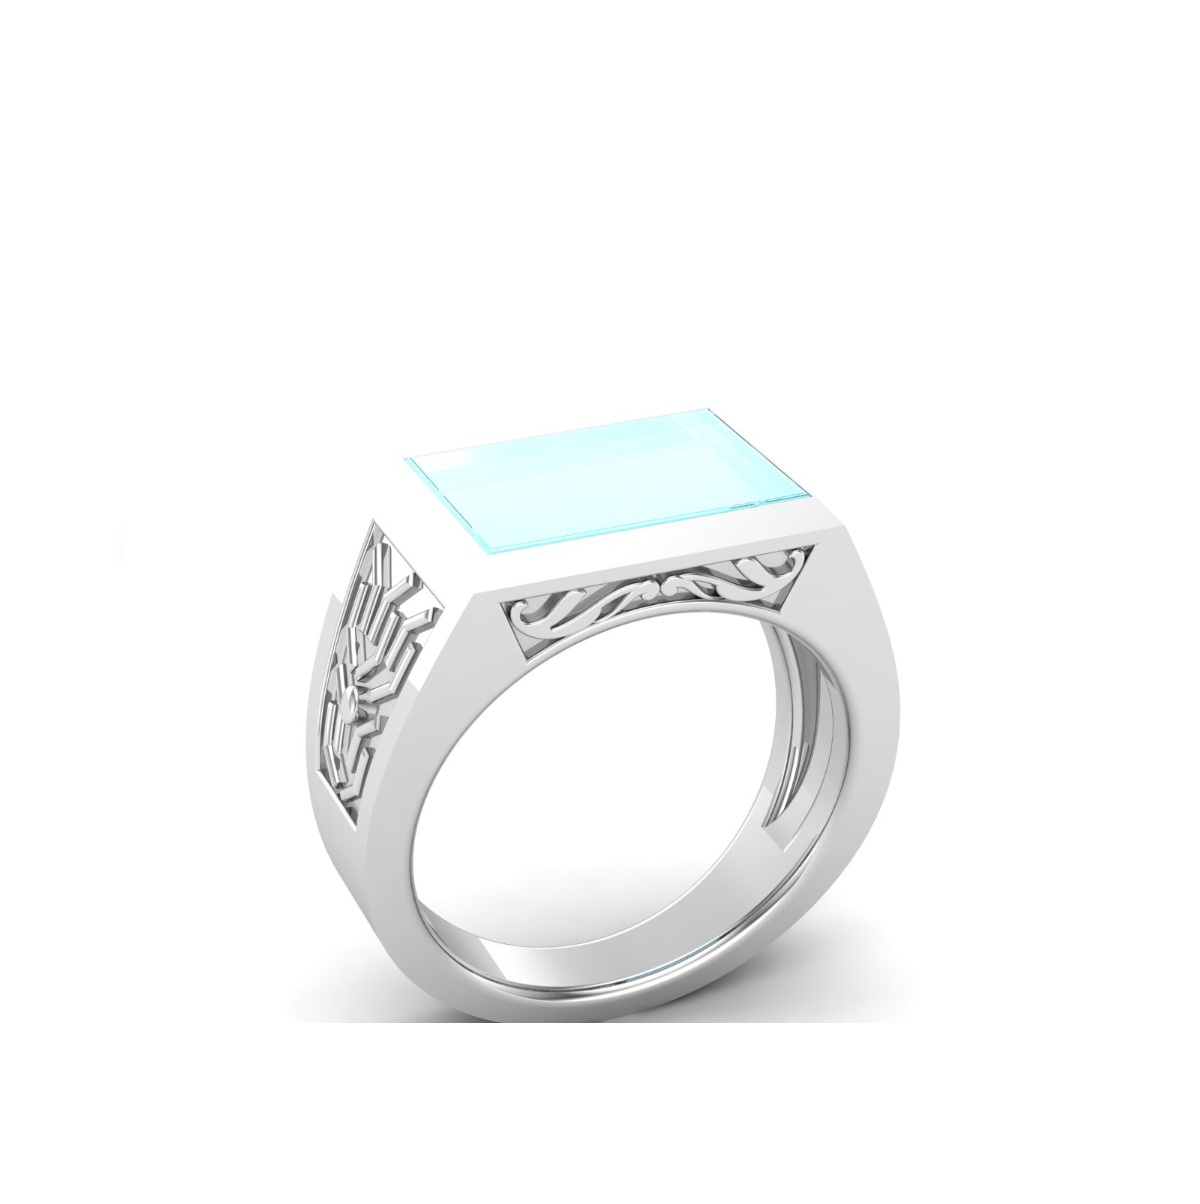 Bague turquoise argent Ananda